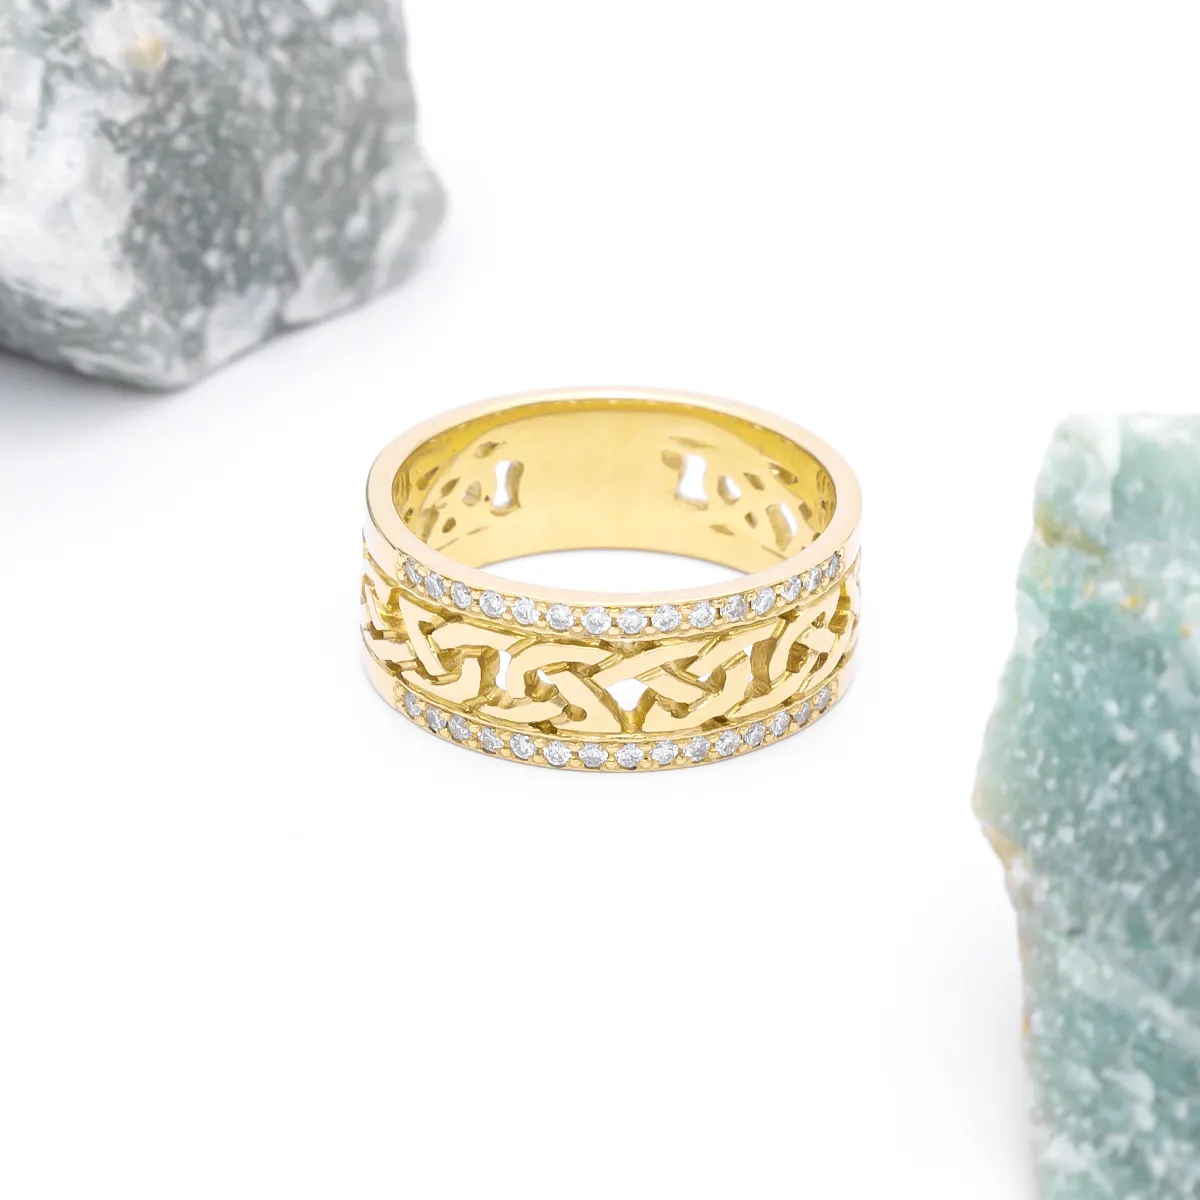 IJCR0034 Yellow Gold Celtic Ring With Diamonds 5